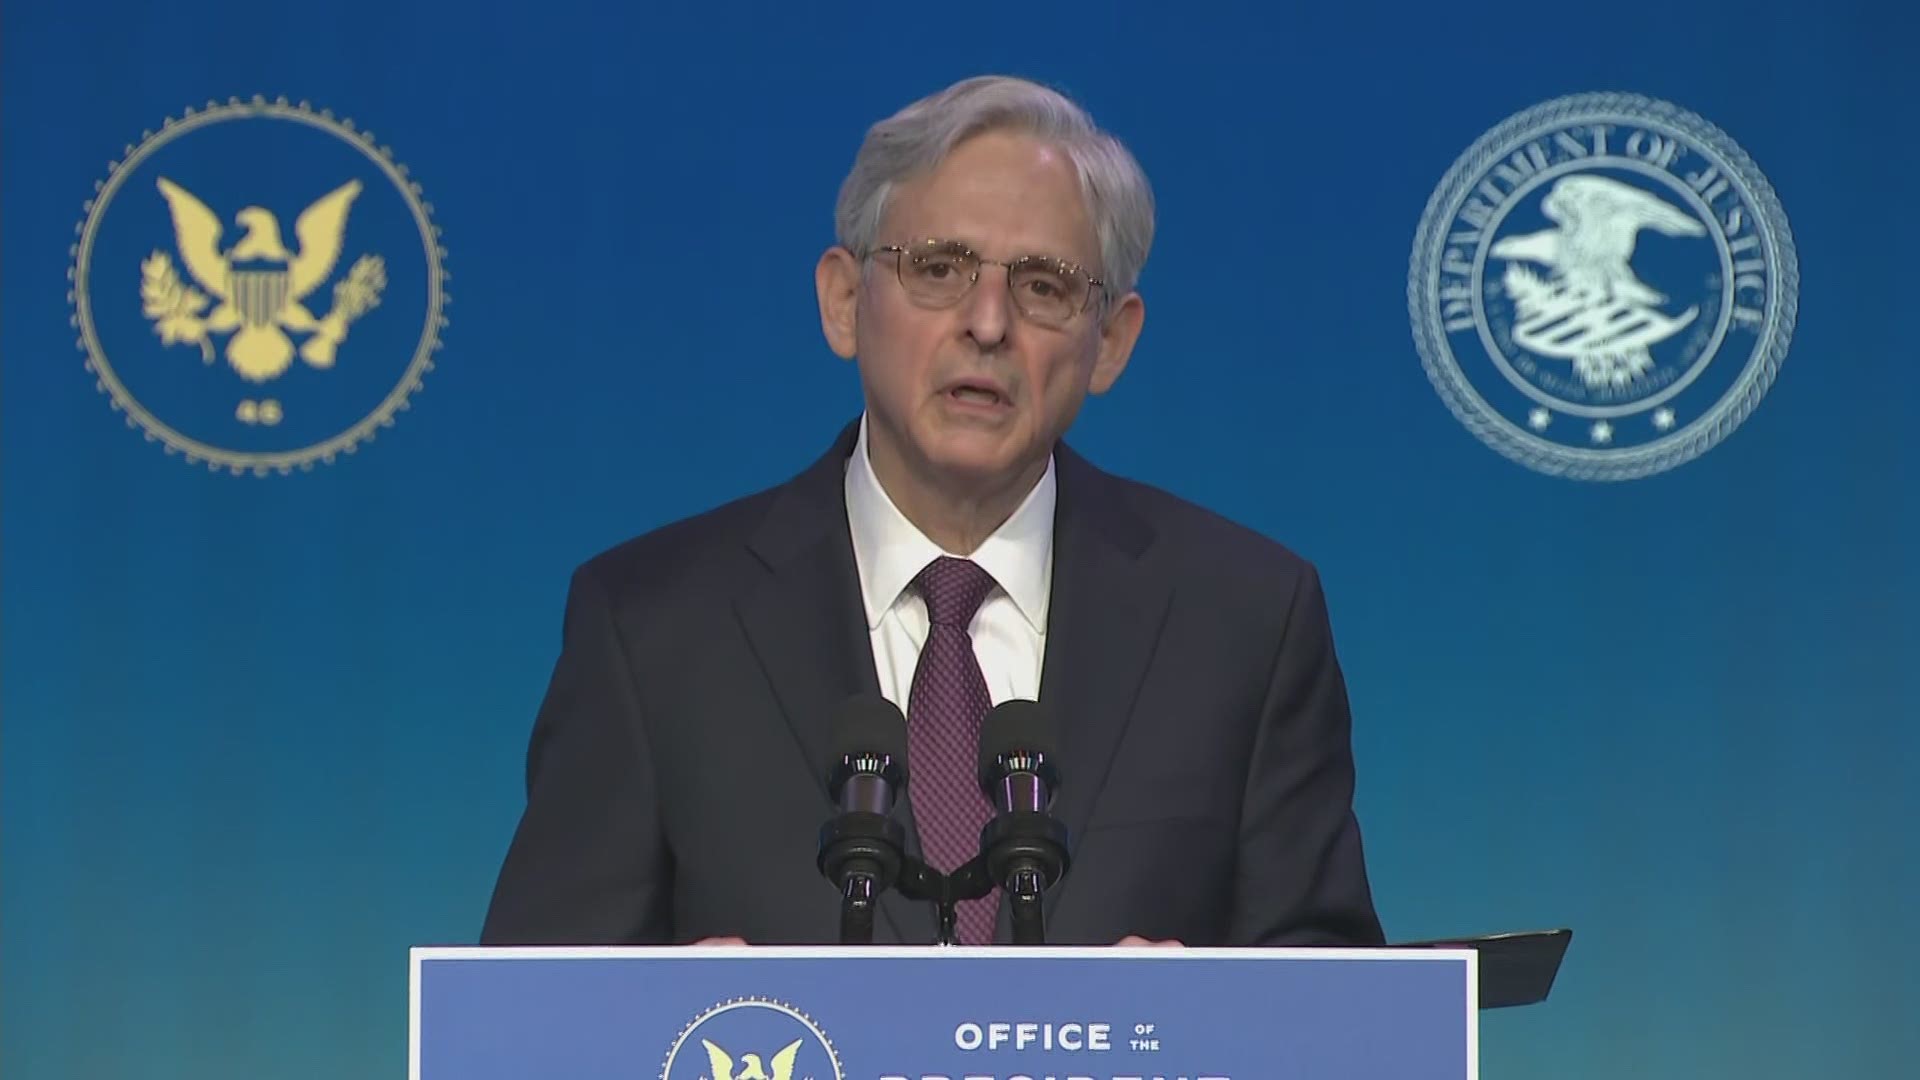 President-elect Joe Bien's attorney general nominee Judge Merrick Garland was introduced Thursday. Garland said the rule of law is the foundation of democracy.